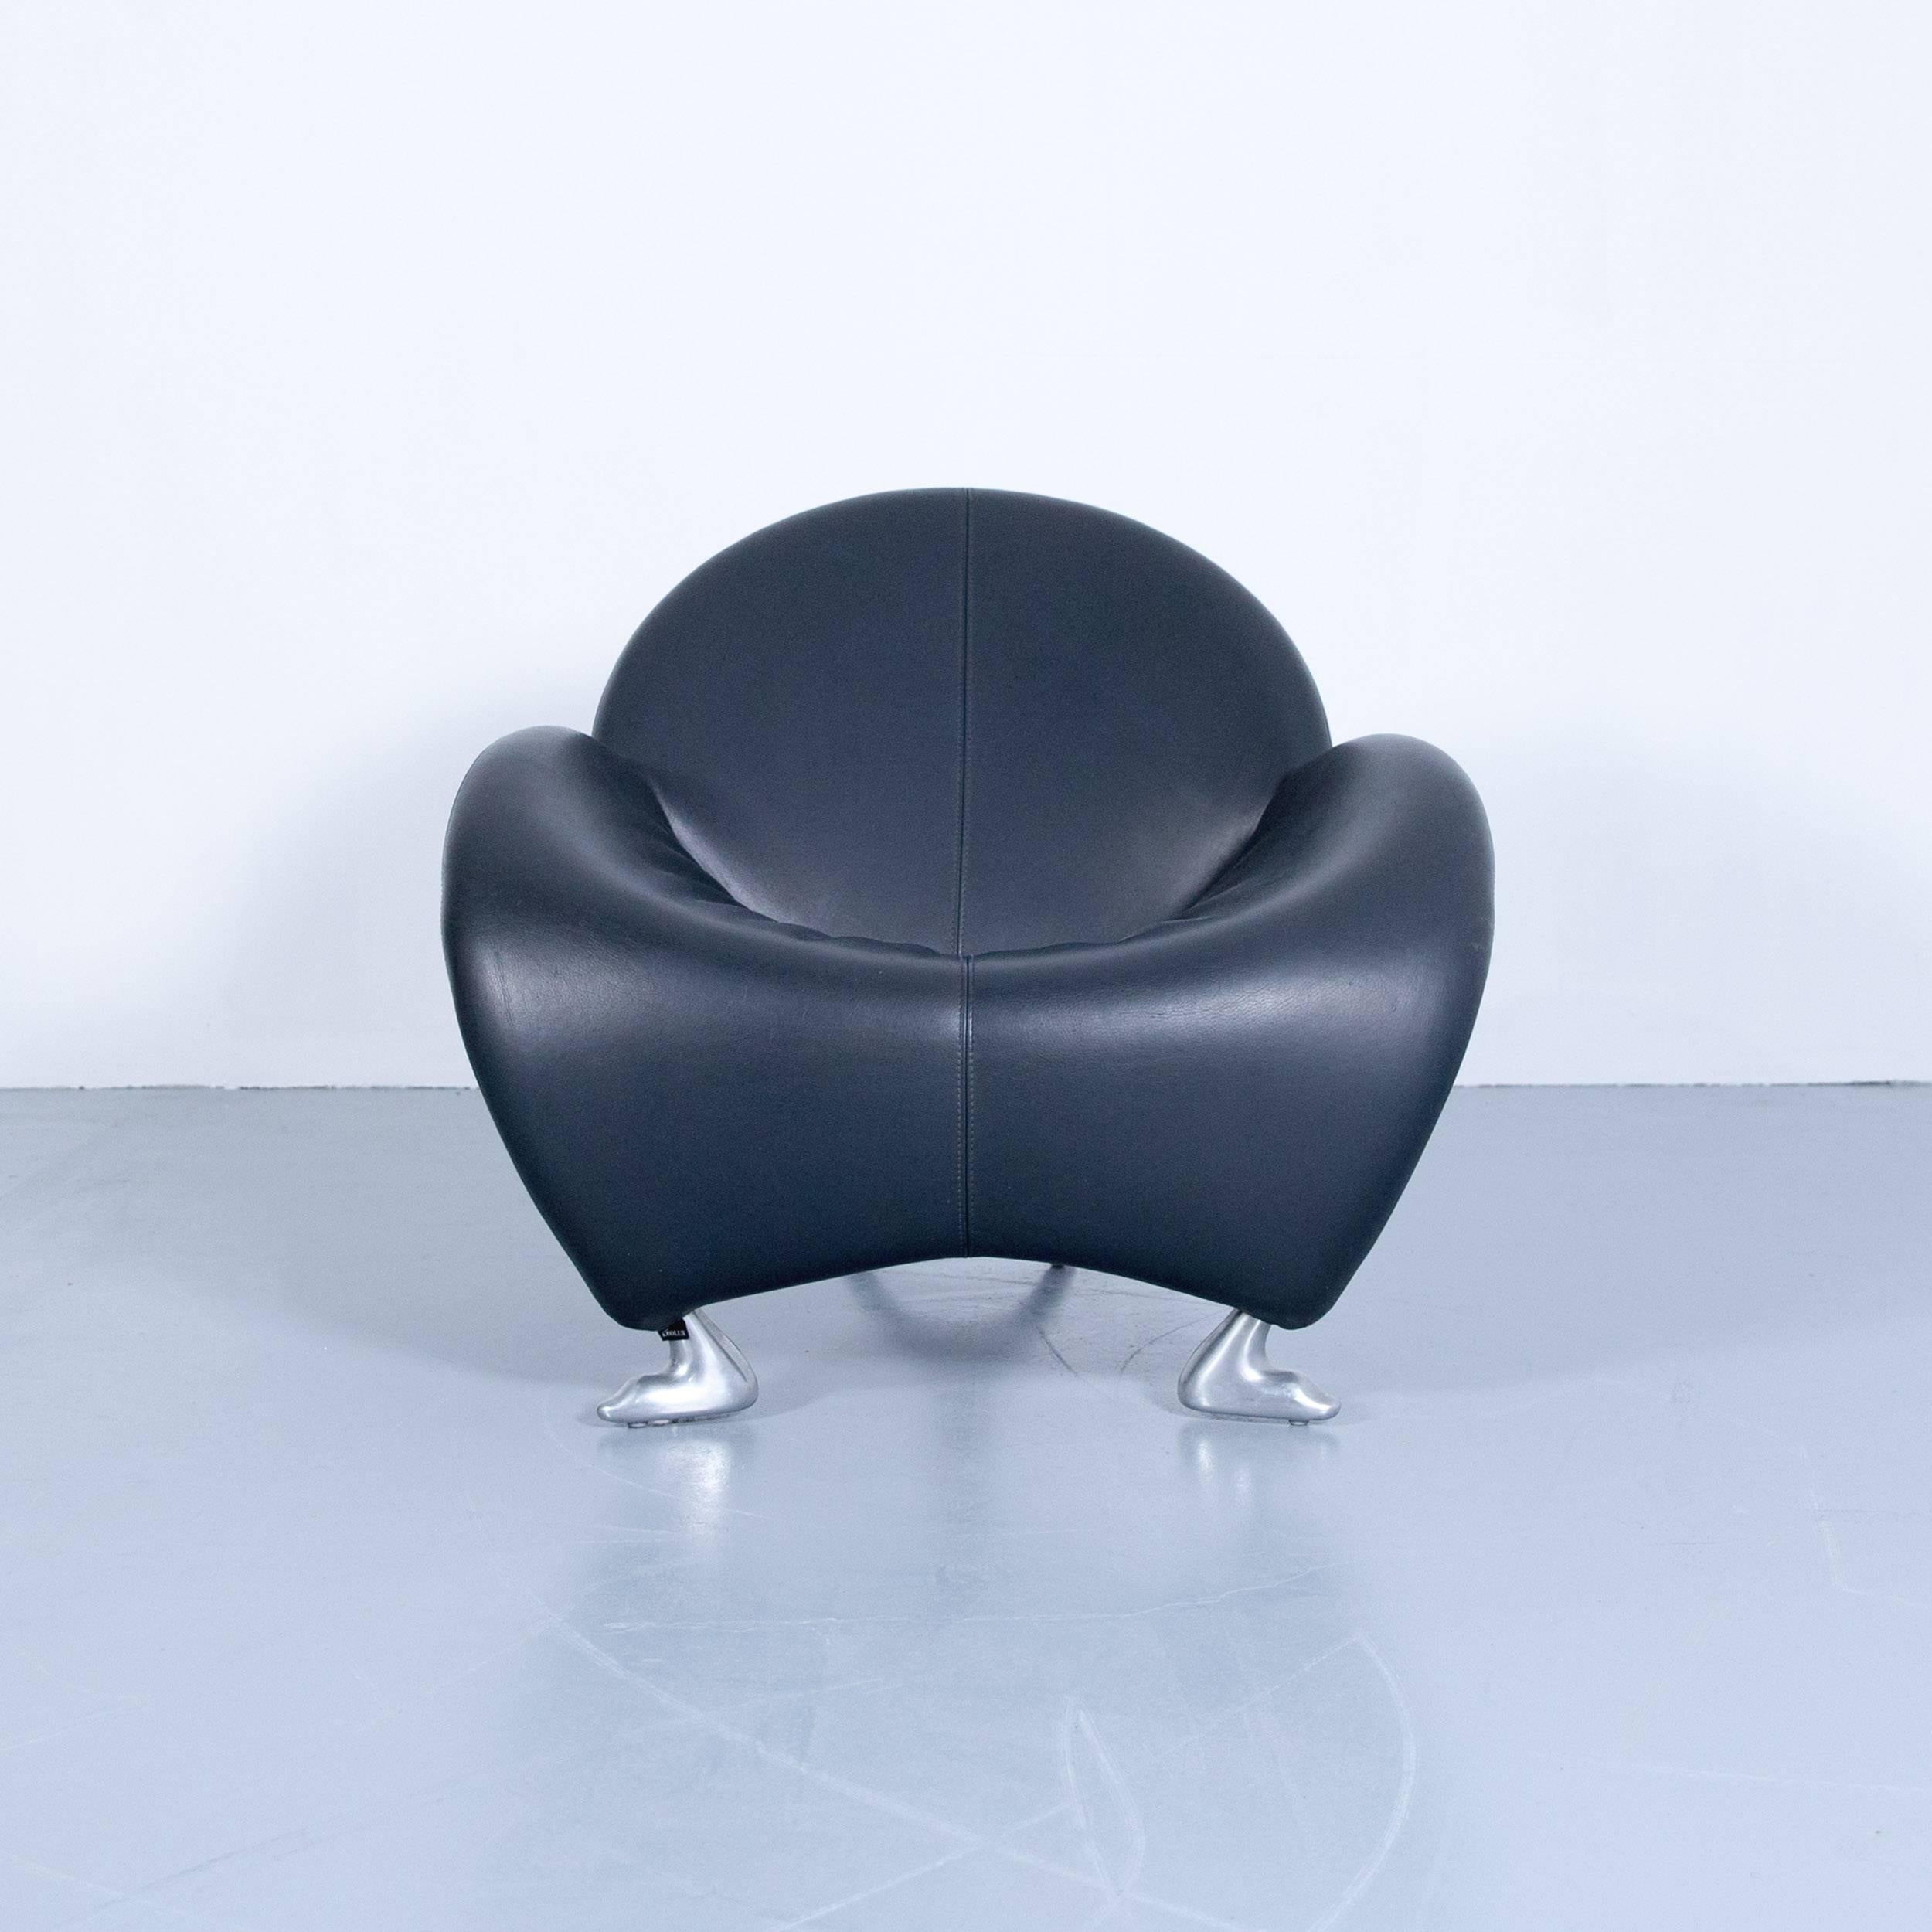 Grey/Anthracite colored original Leolux Papageno designer leather chair in a minimalistic and modern design, made for pure comfort and style.